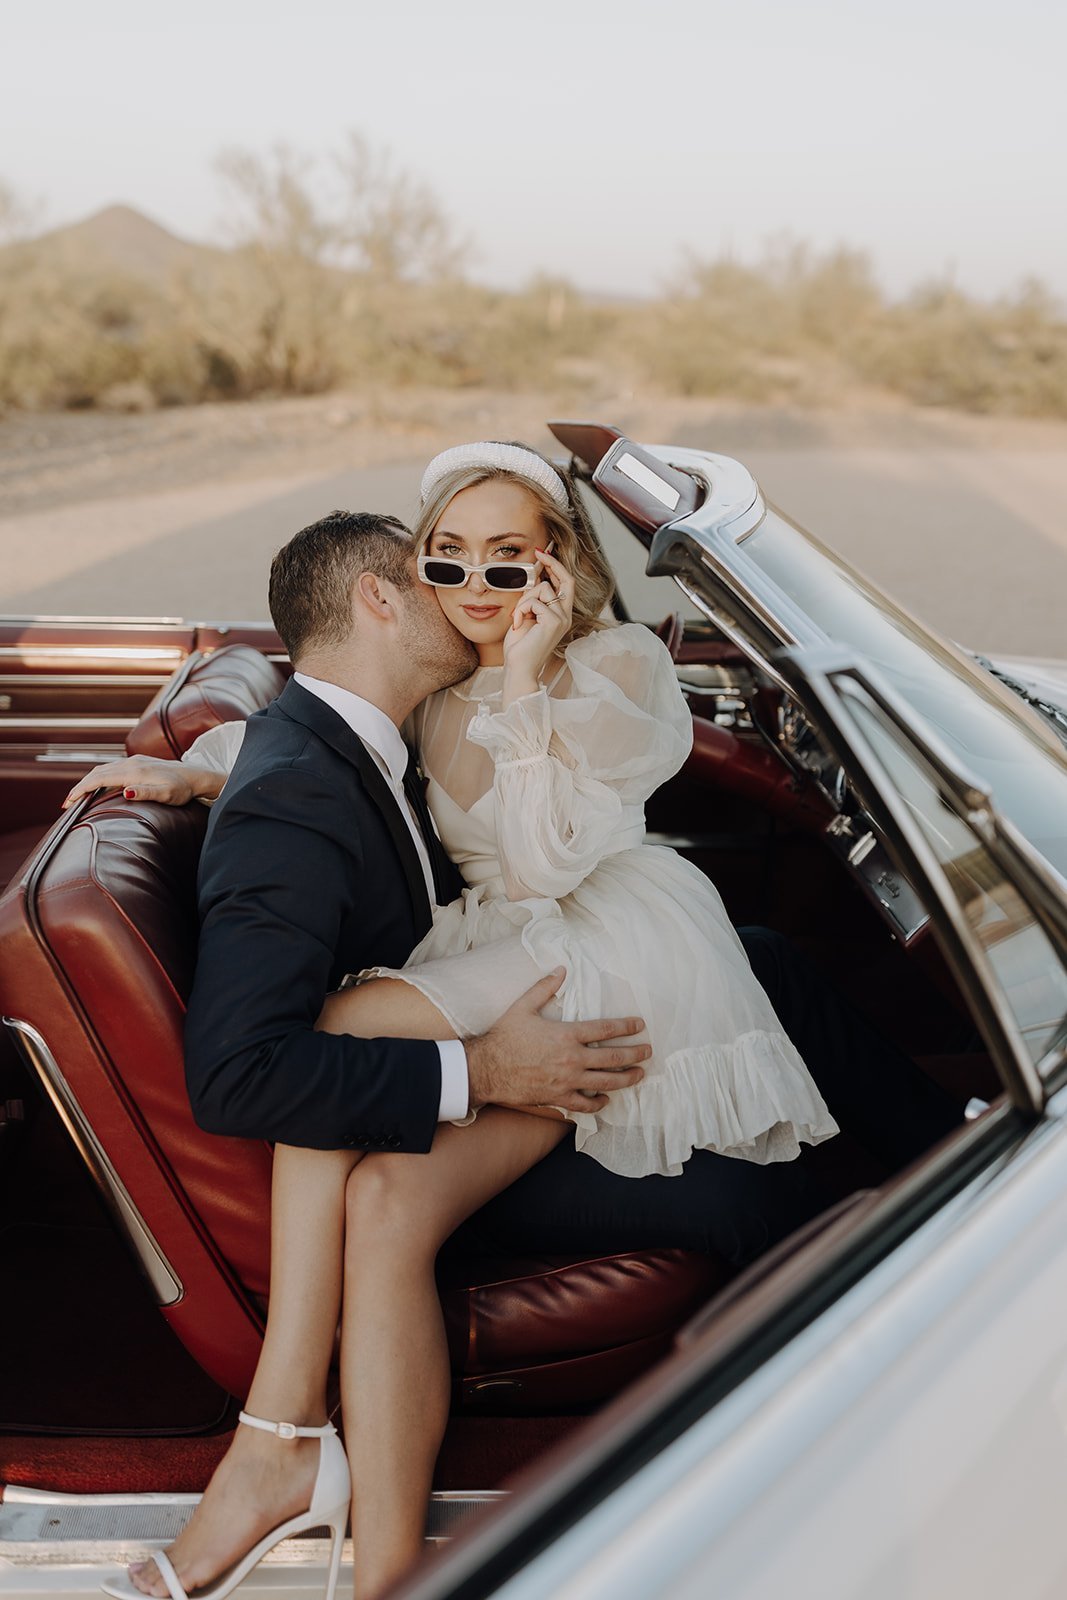 Groom kissing bride's neck in vintage white convertible